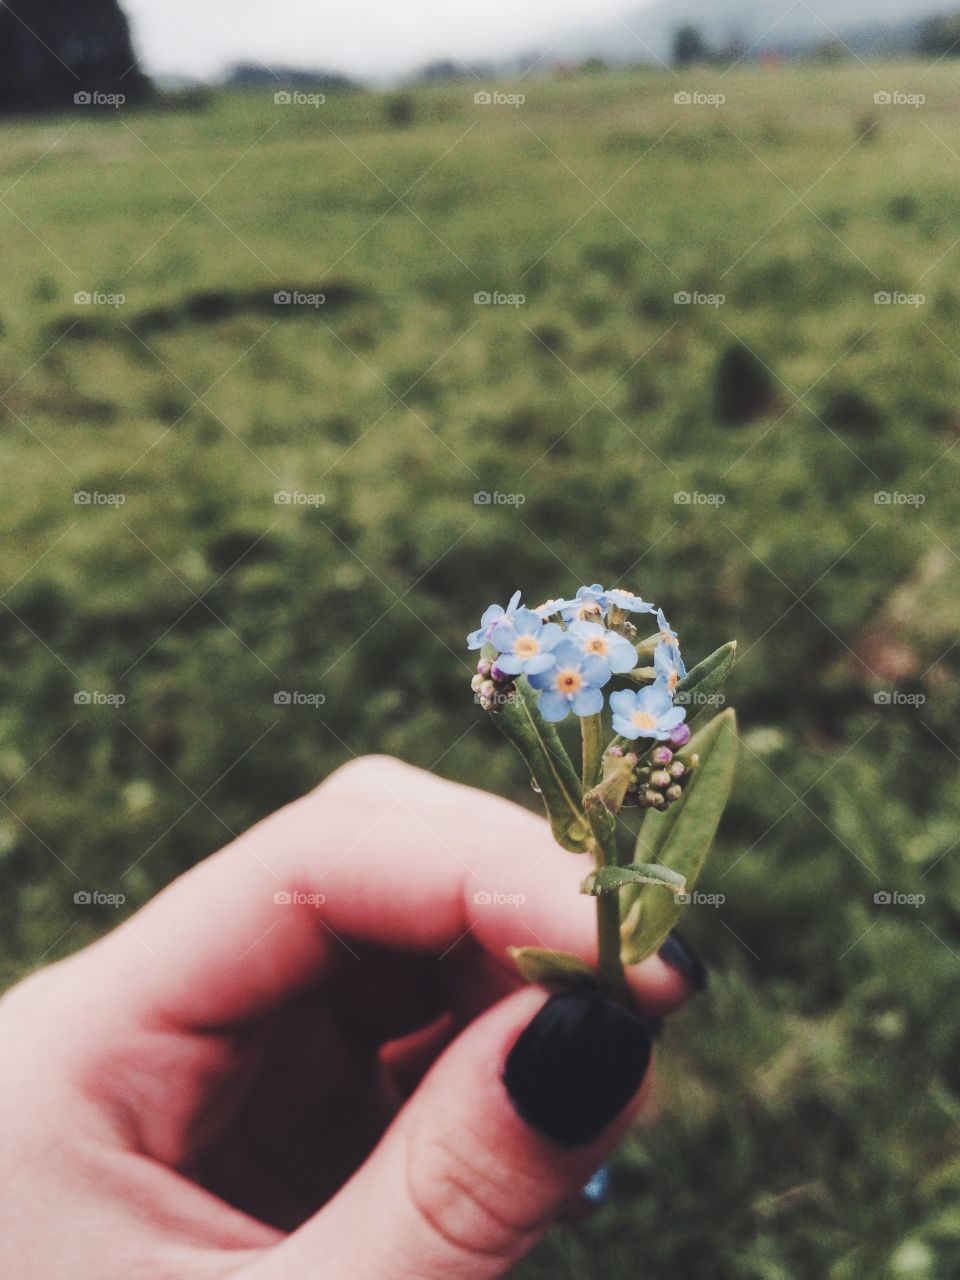 Forget-me-not. During the walk trough a meadow 